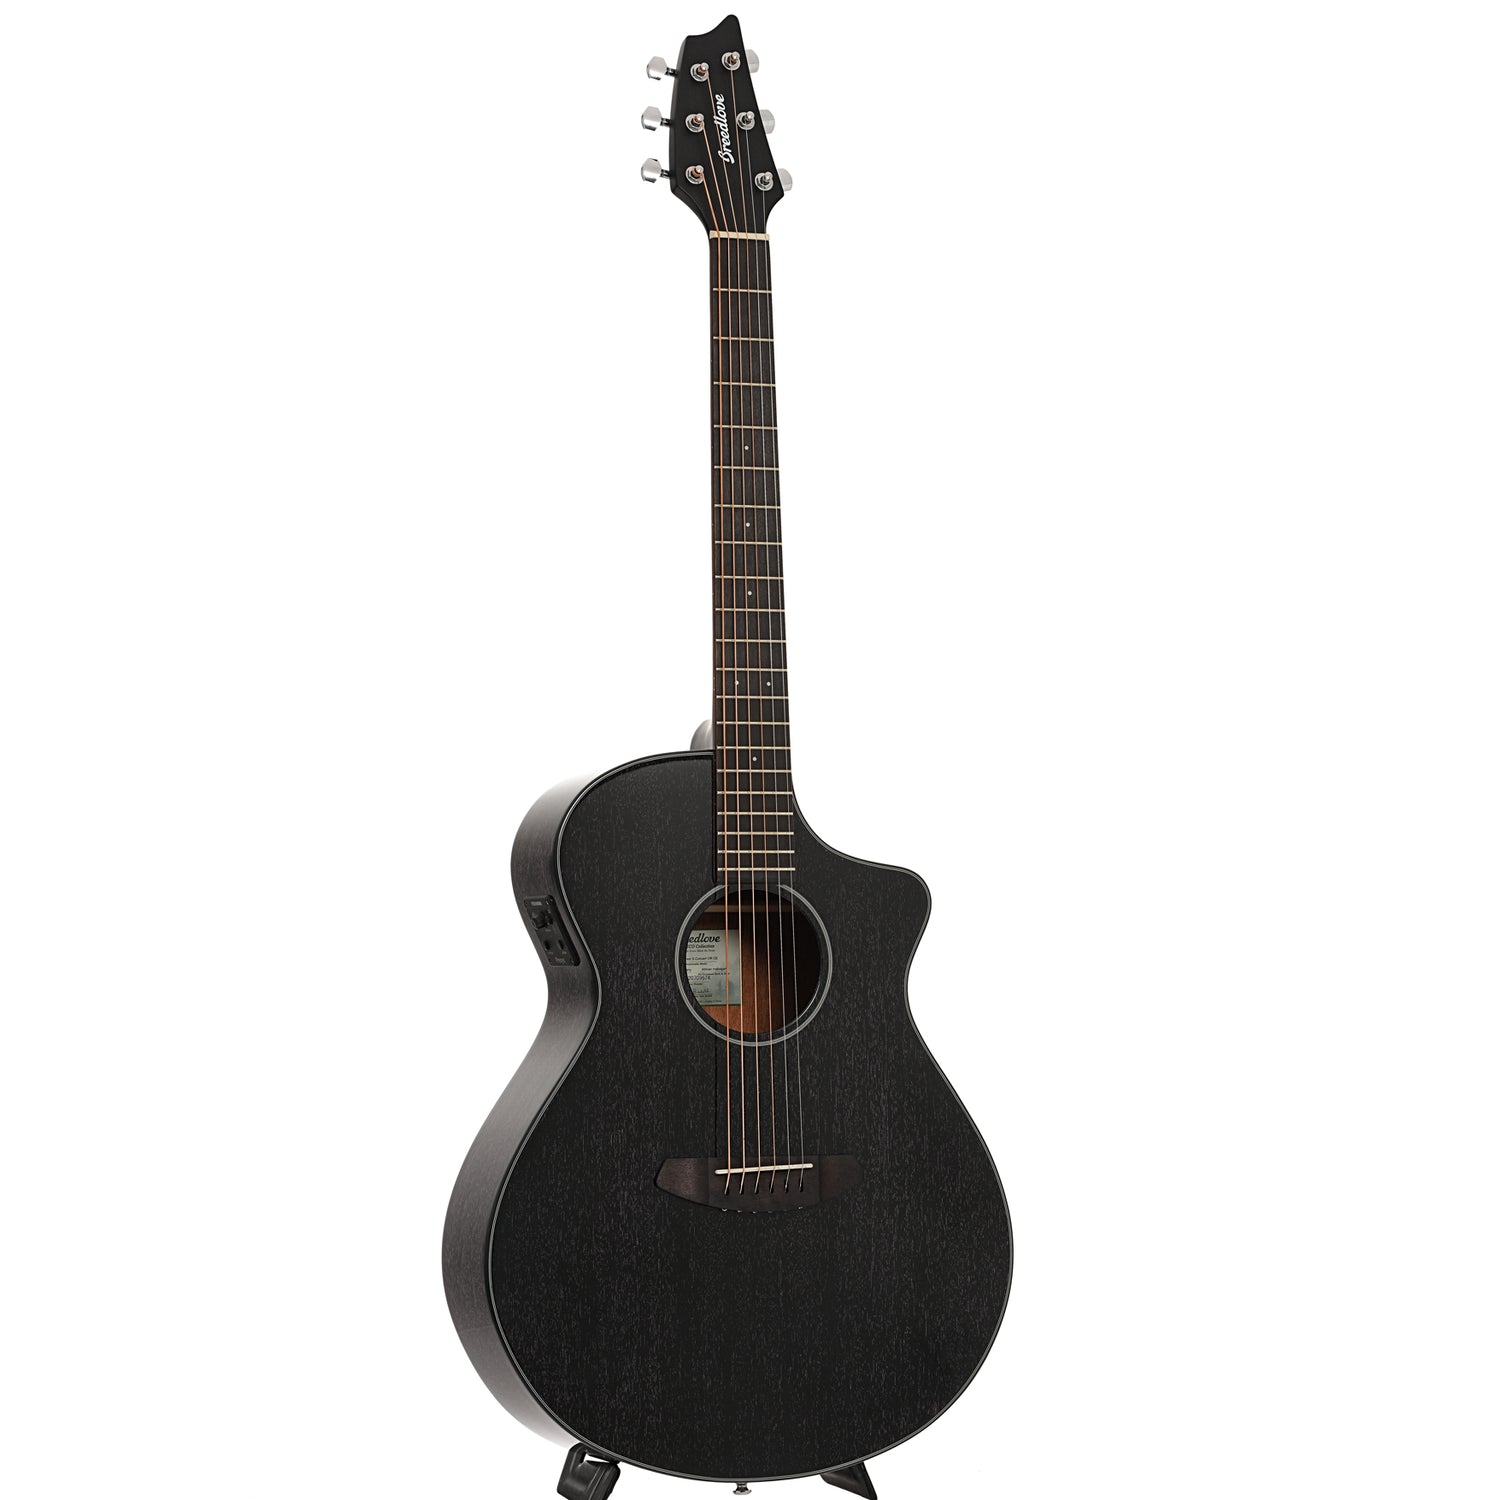 Full front and side of Breedlove Eco Collection Rainforest S Concert Orchid CE African mahogany